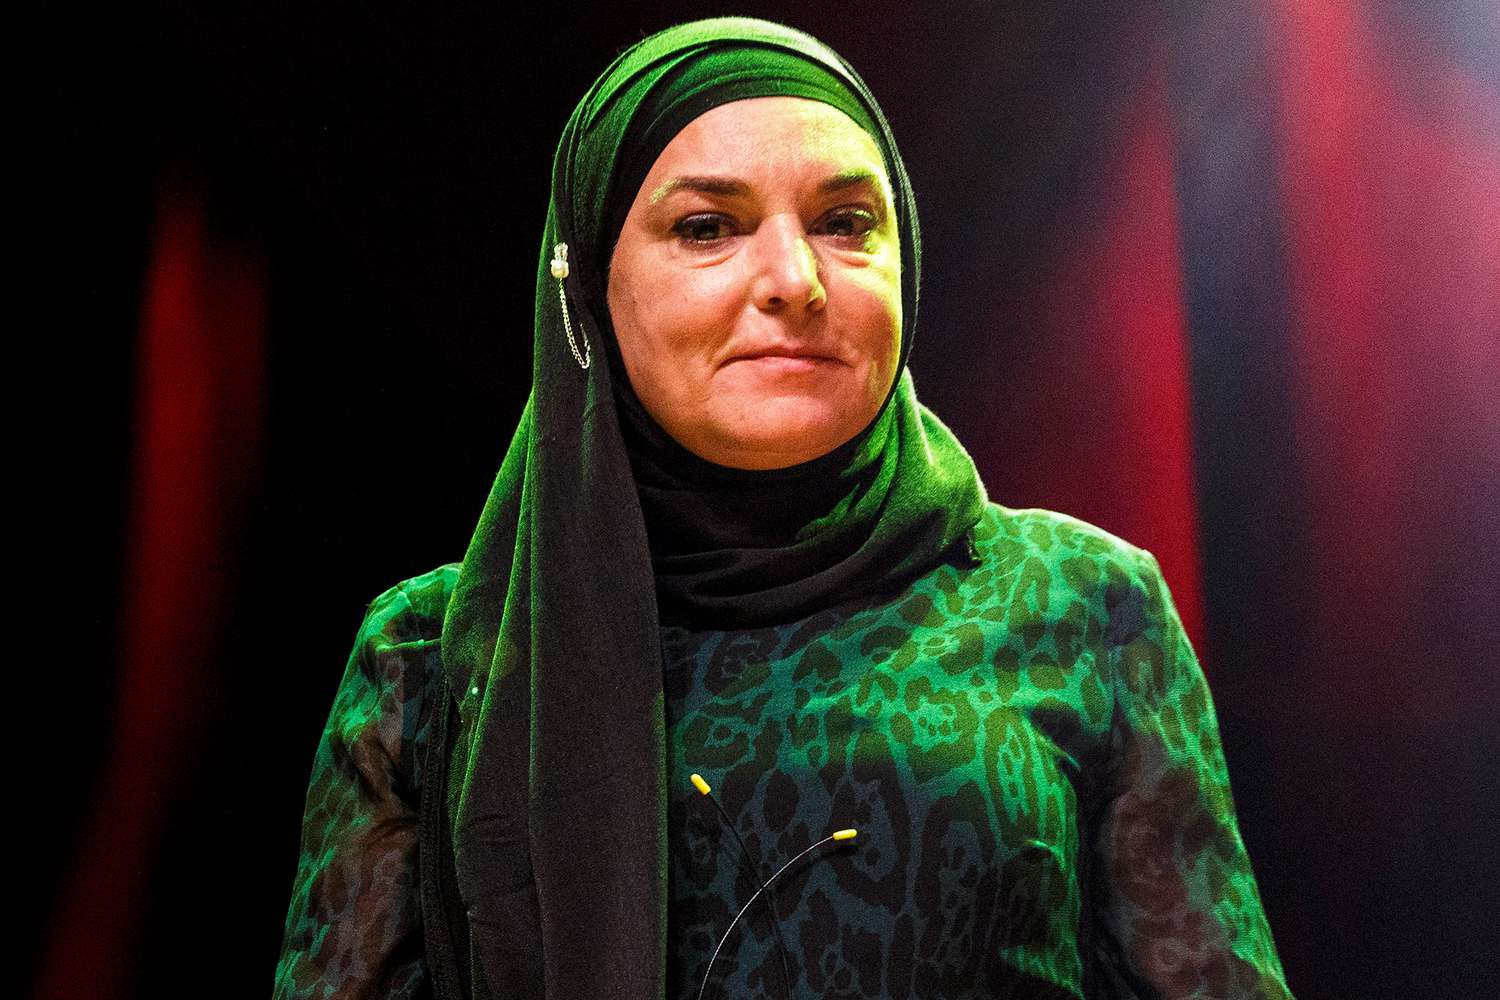 Sinead O'Connor performs on stage at Vogue Theatre on February 01, 2020 in Vancouver, Canada.